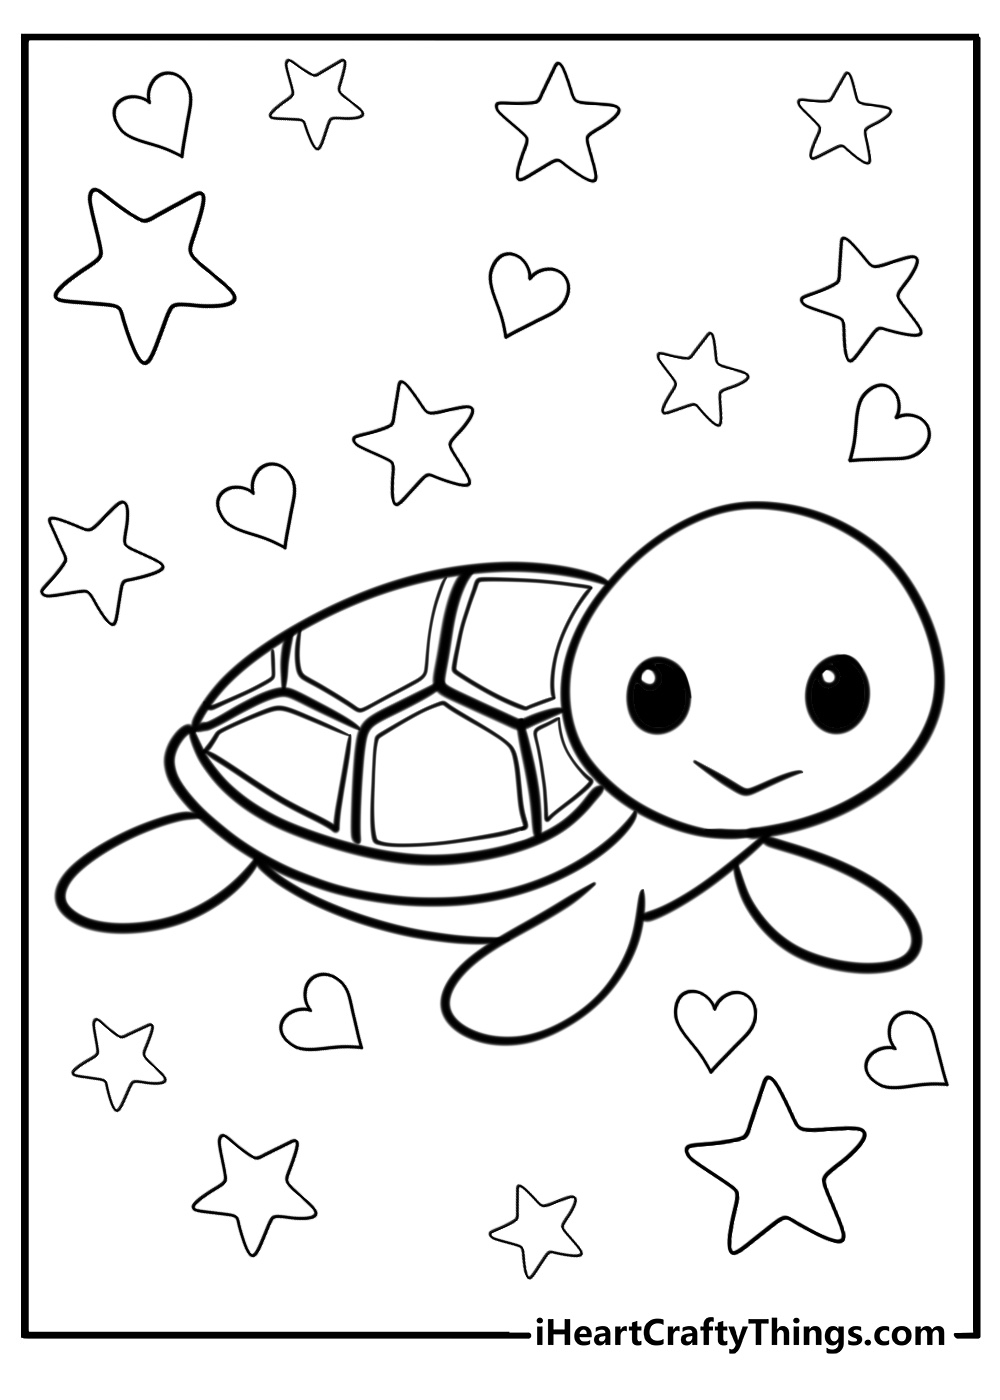 Super easy turtle coloring page for preschoolers